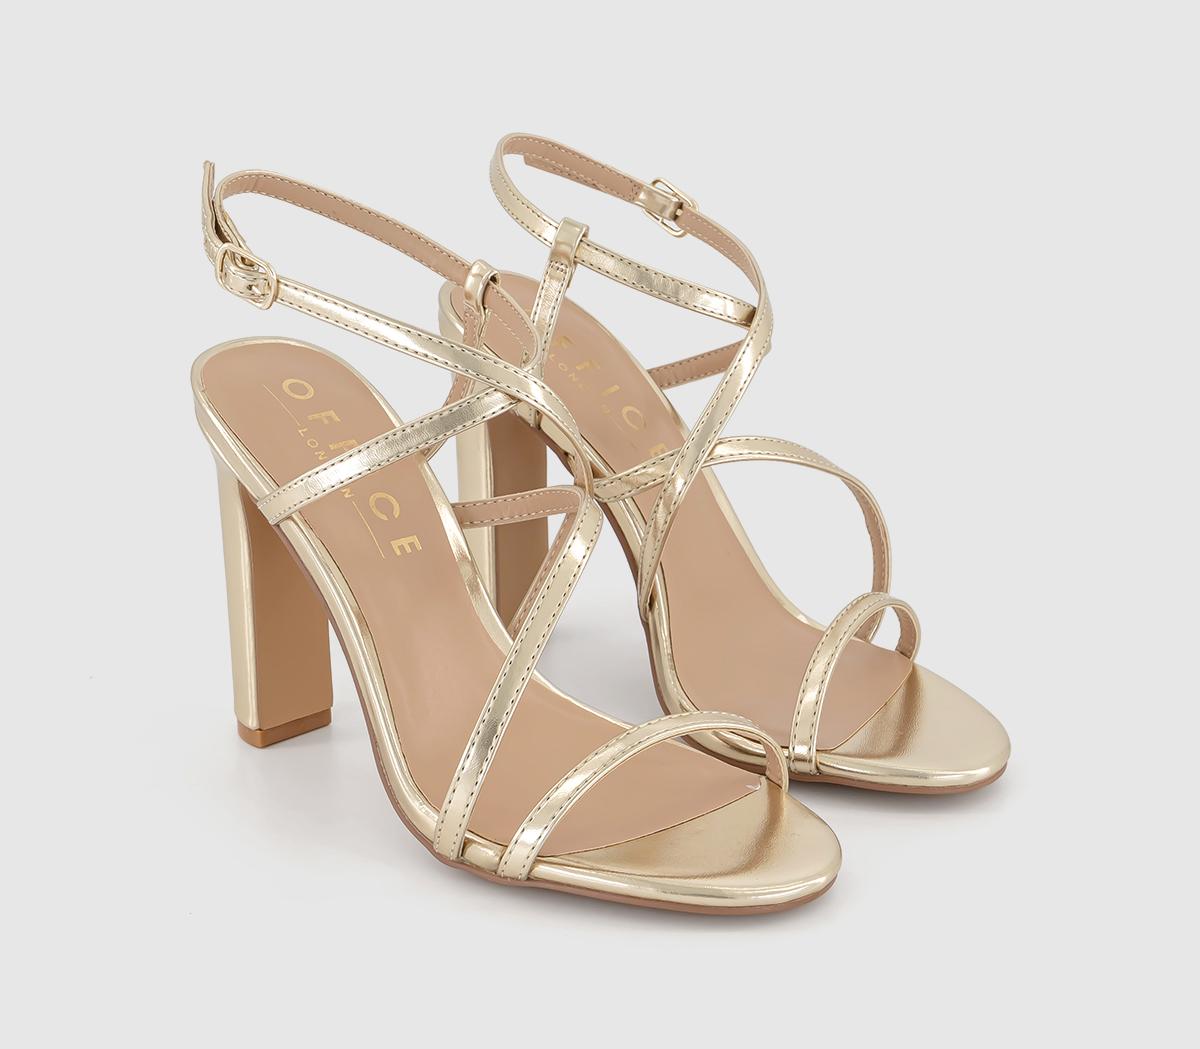 OFFICE Womens Harlequin Strappy Block Heels Gold, 6